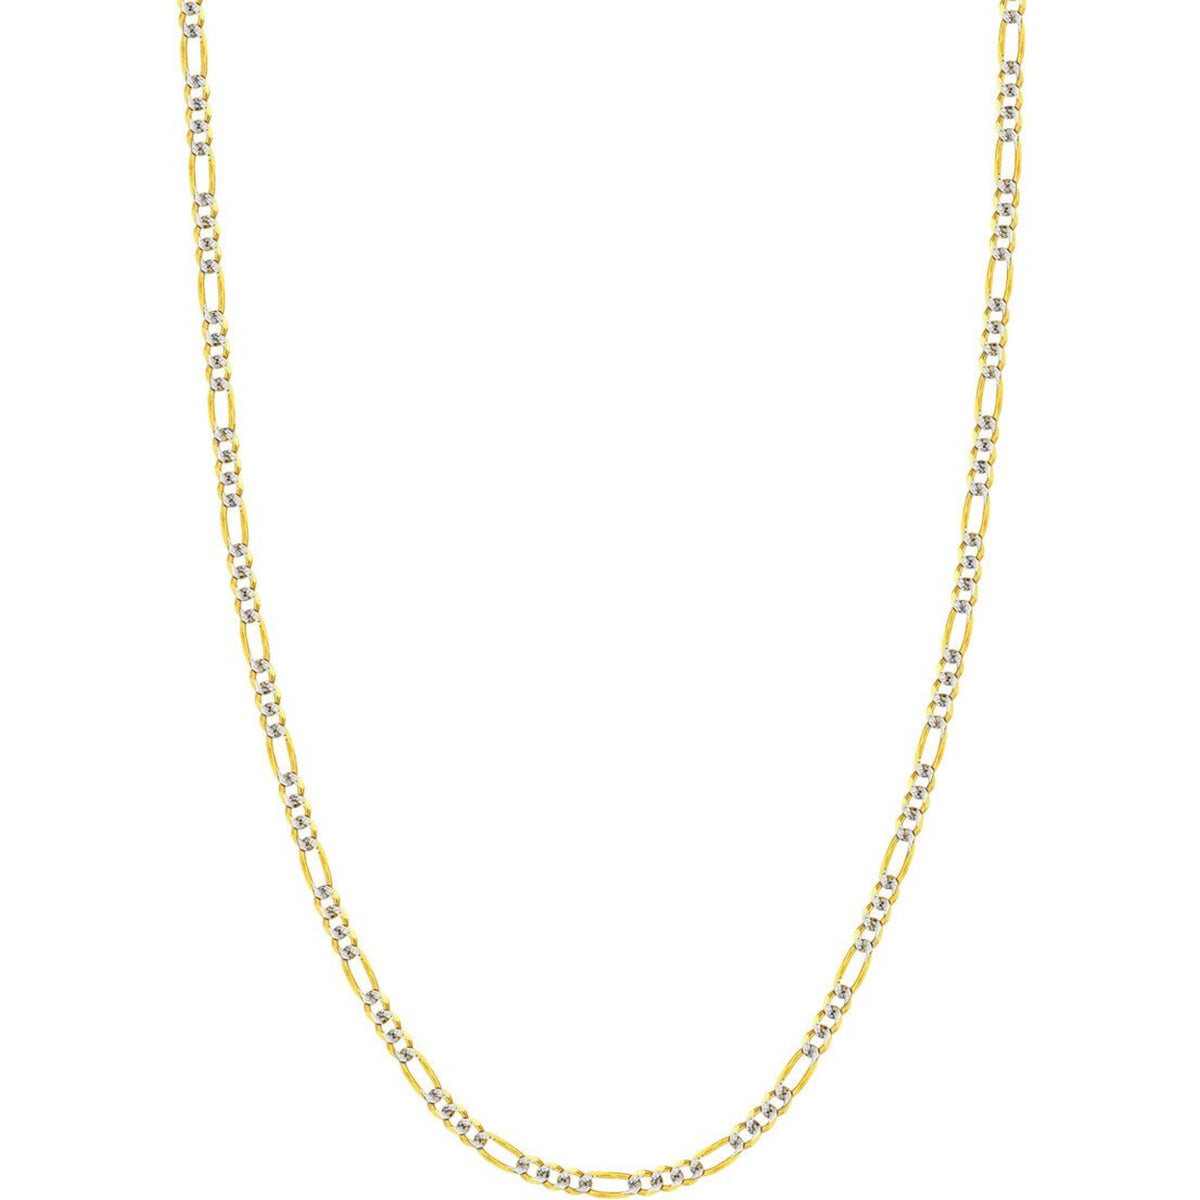 Olas d'Oro 24" Necklace - 14K Yellow/White Gold 3.9mm Two-Tone Pave Figaro Chain with Lobster Lock